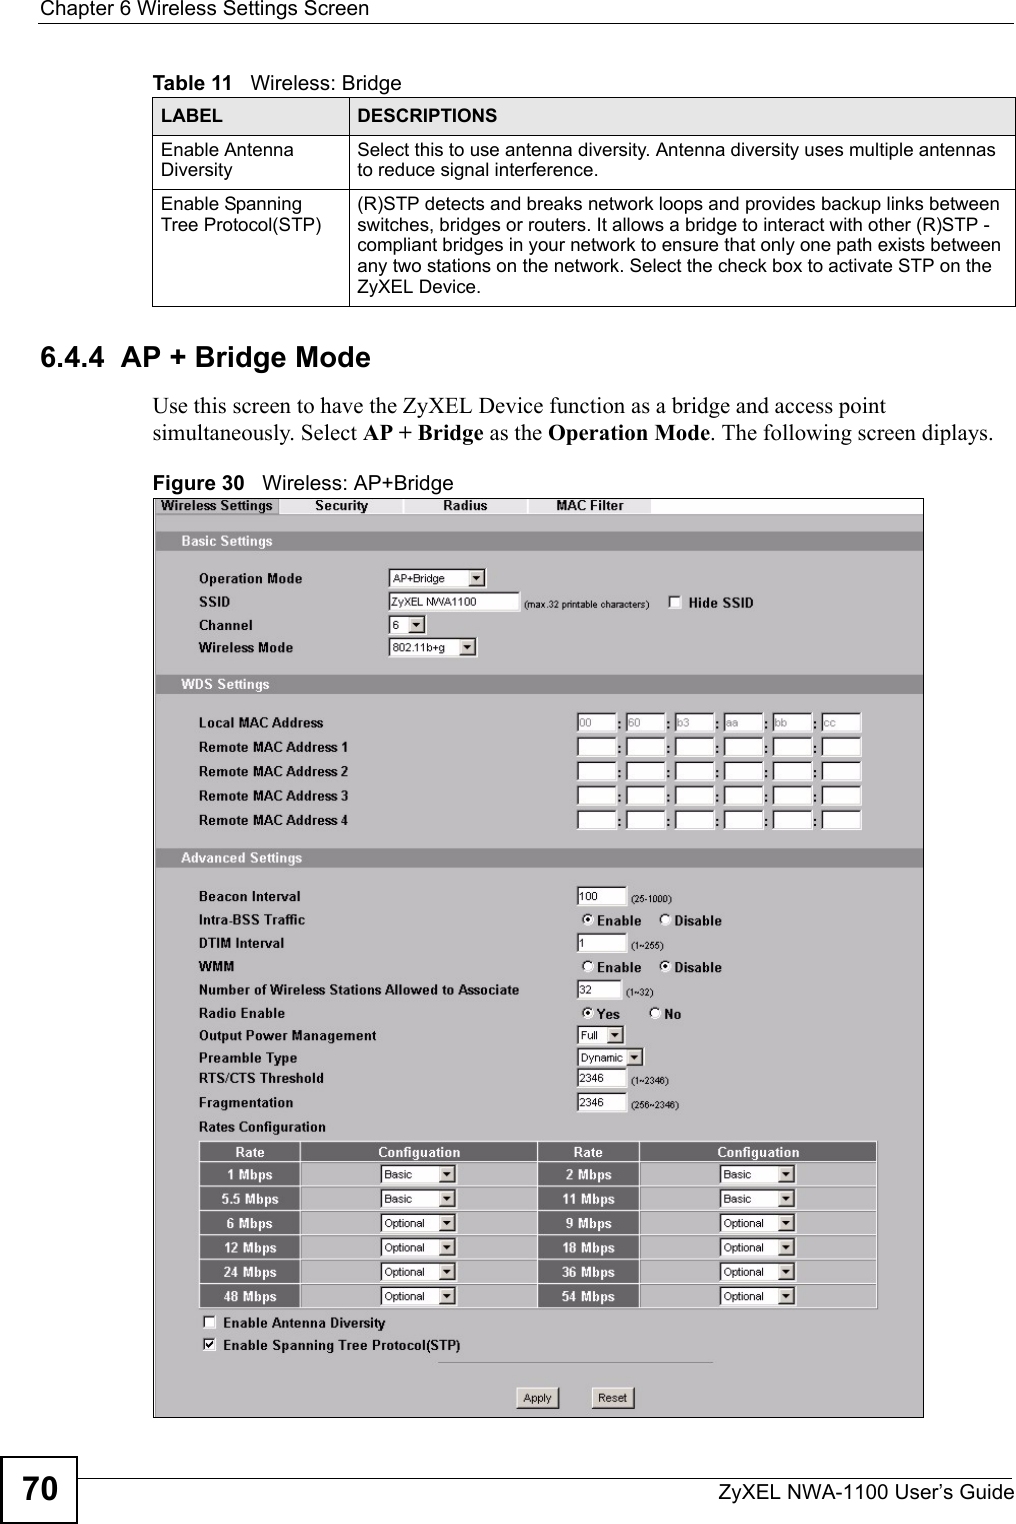 Chapter 6 Wireless Settings ScreenZyXEL NWA-1100 User’s Guide706.4.4  AP + Bridge ModeUse this screen to have the ZyXEL Device function as a bridge and access point simultaneously. Select AP + Bridge as the Operation Mode. The following screen diplays. Figure 30   Wireless: AP+BridgeEnable Antenna DiversitySelect this to use antenna diversity. Antenna diversity uses multiple antennas to reduce signal interference.Enable Spanning Tree Protocol(STP)(R)STP detects and breaks network loops and provides backup links between switches, bridges or routers. It allows a bridge to interact with other (R)STP -compliant bridges in your network to ensure that only one path exists between any two stations on the network. Select the check box to activate STP on the ZyXEL Device.Table 11   Wireless: BridgeLABEL DESCRIPTIONS